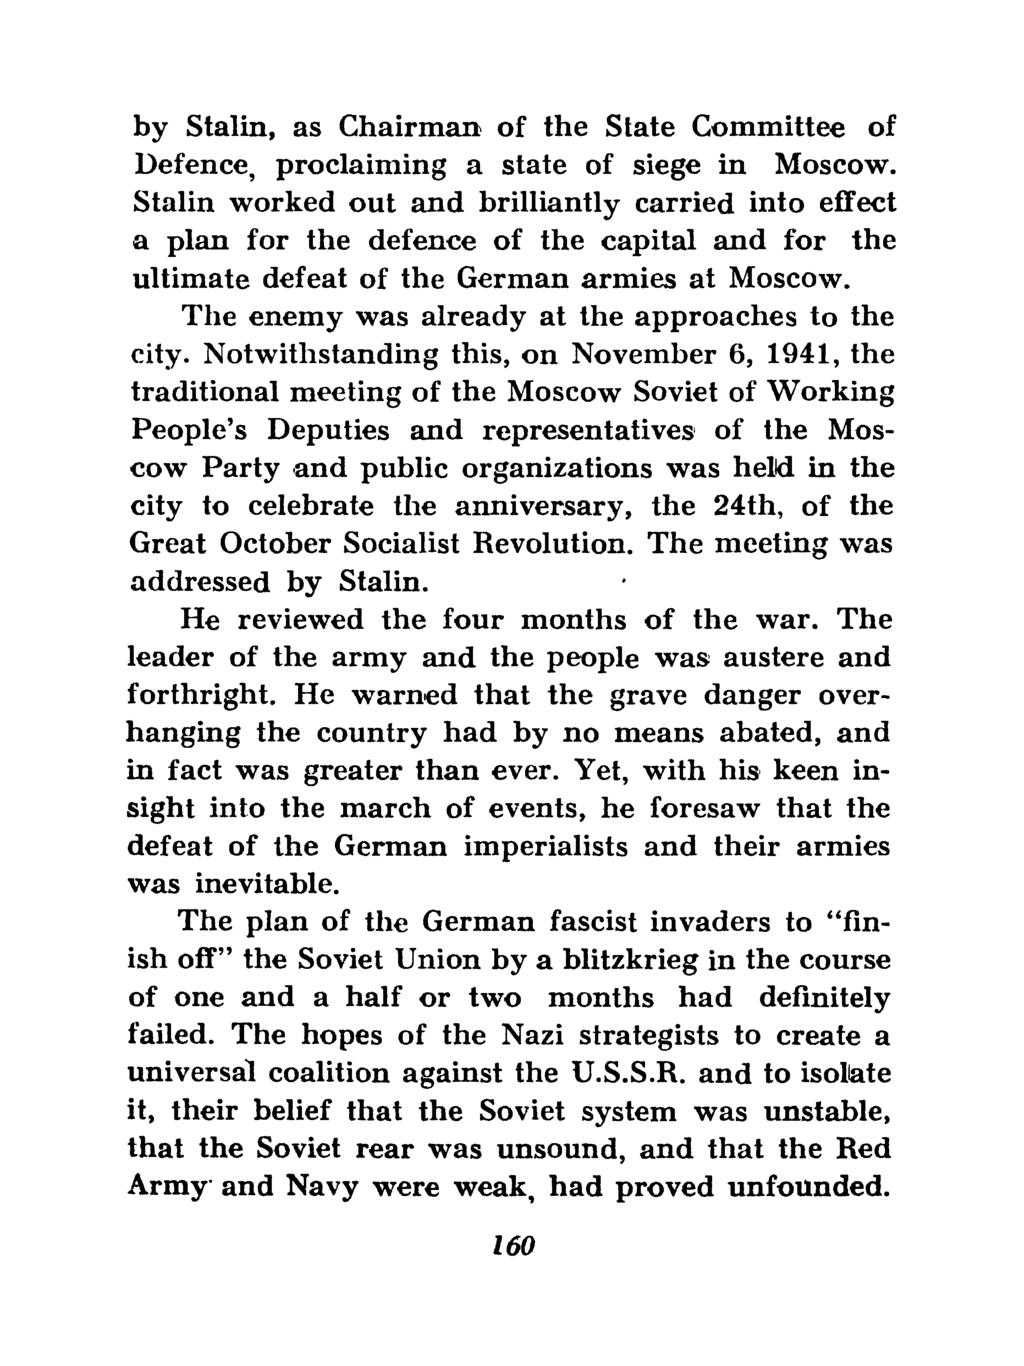 by Stalin, as Chairman of the State Committee of Defence, proclaiming a state of siege in Moscow.